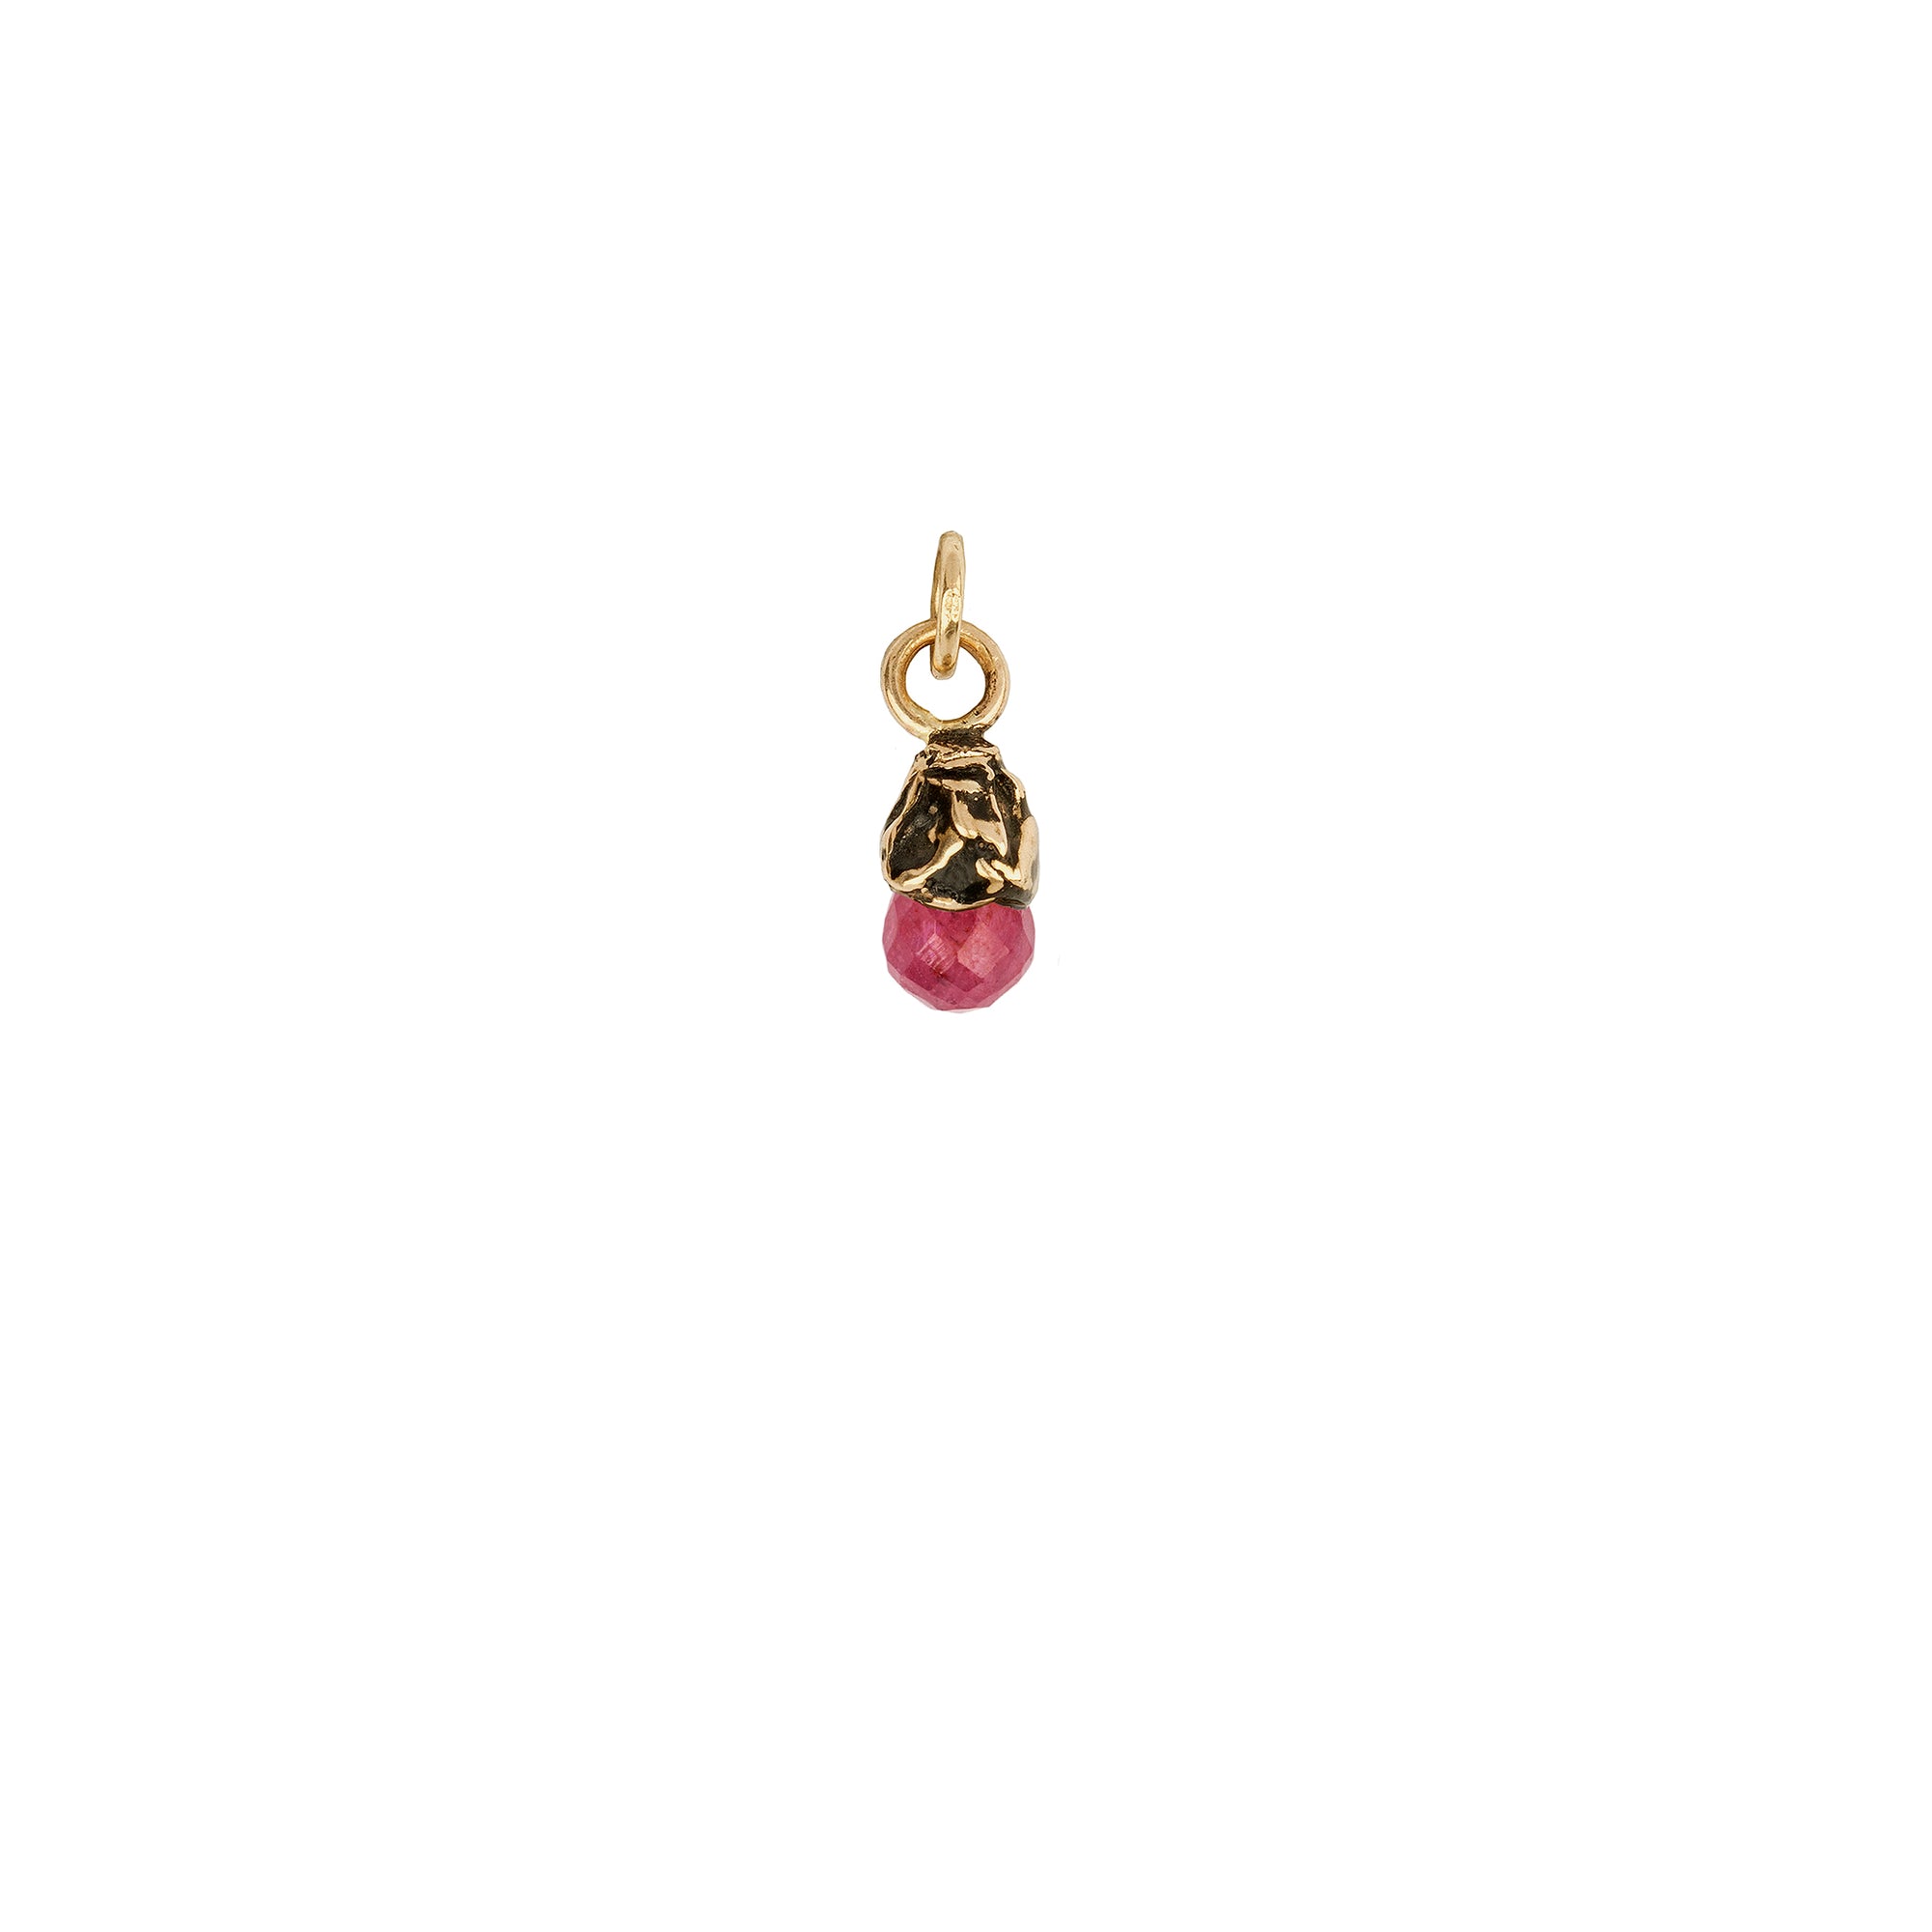 Passion 14K Gold Capped Attraction Charm